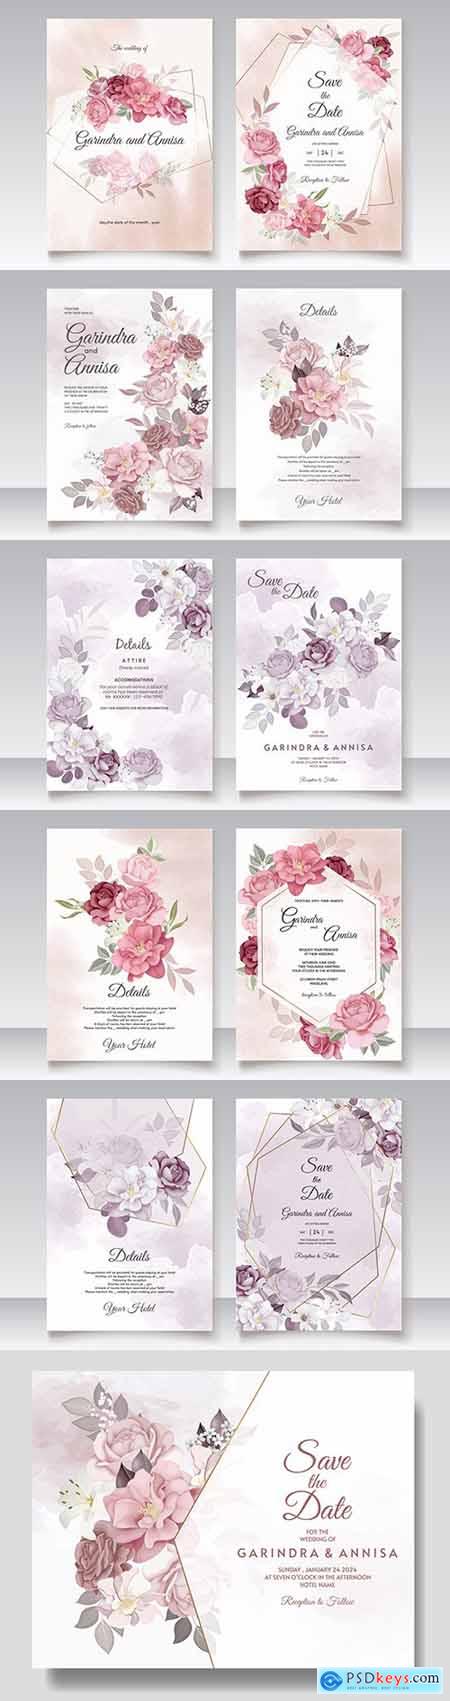 Floral wedding invitation template with elegant flowers and leaves